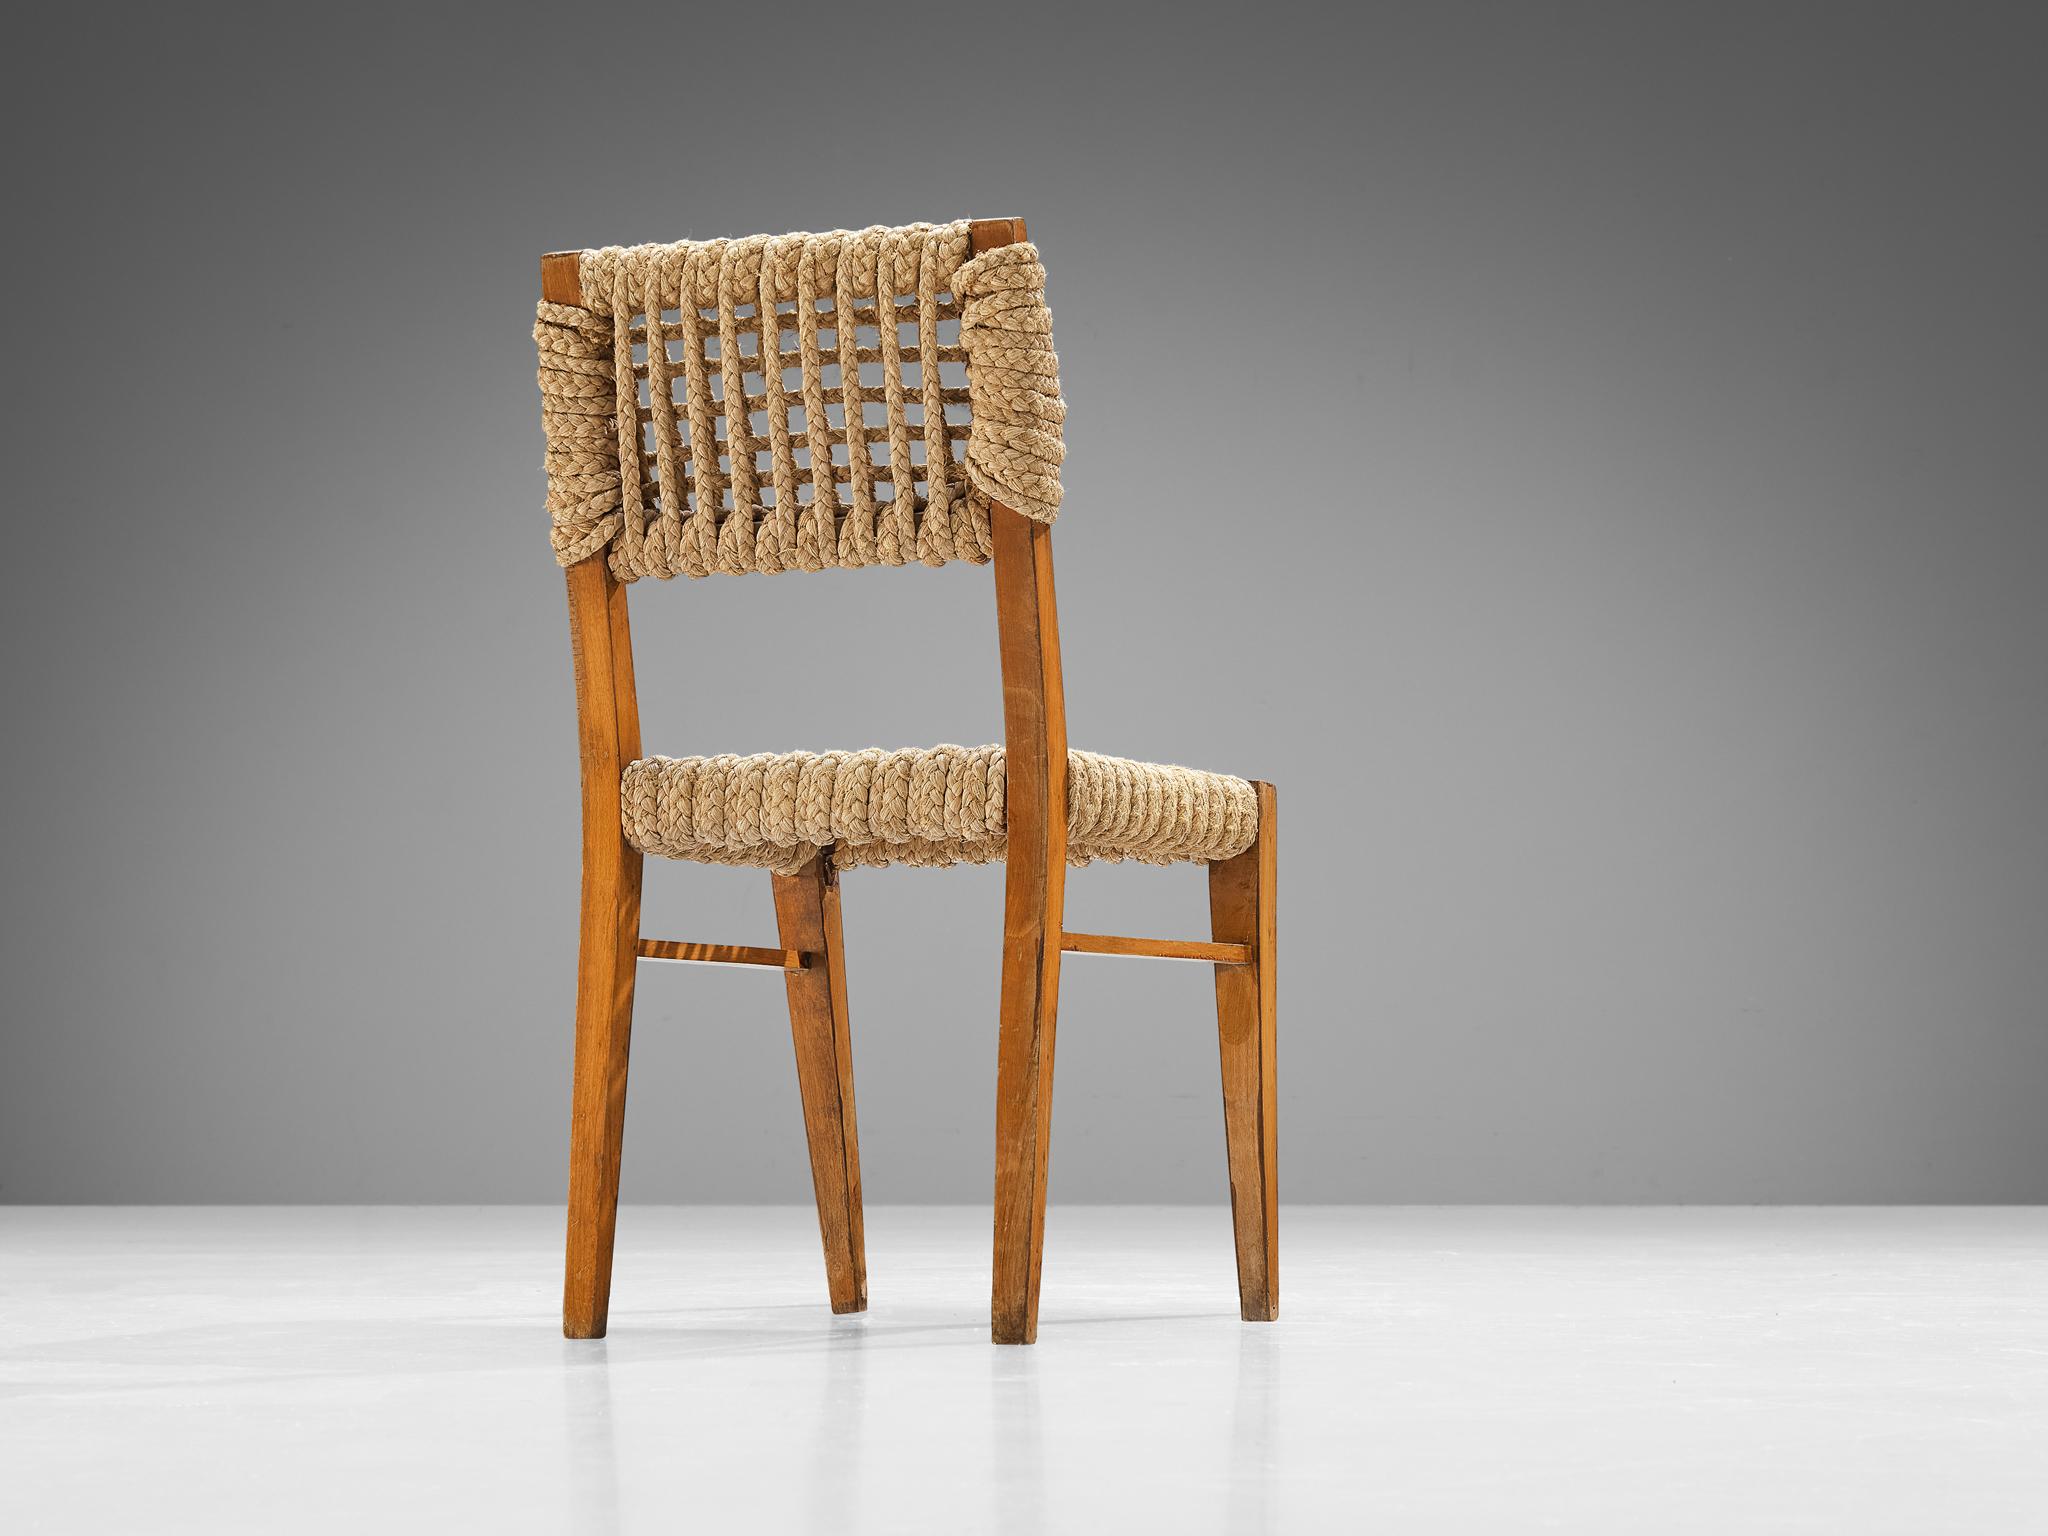 Adrien Audoux & Frida Minet for Vibo Vesoul, dining chair, beech, straw, France, 1950s. 

The seating and backrest are made of woven hemp from the abaca plant which is close to the species of the banana plant. This natural style is typical for the